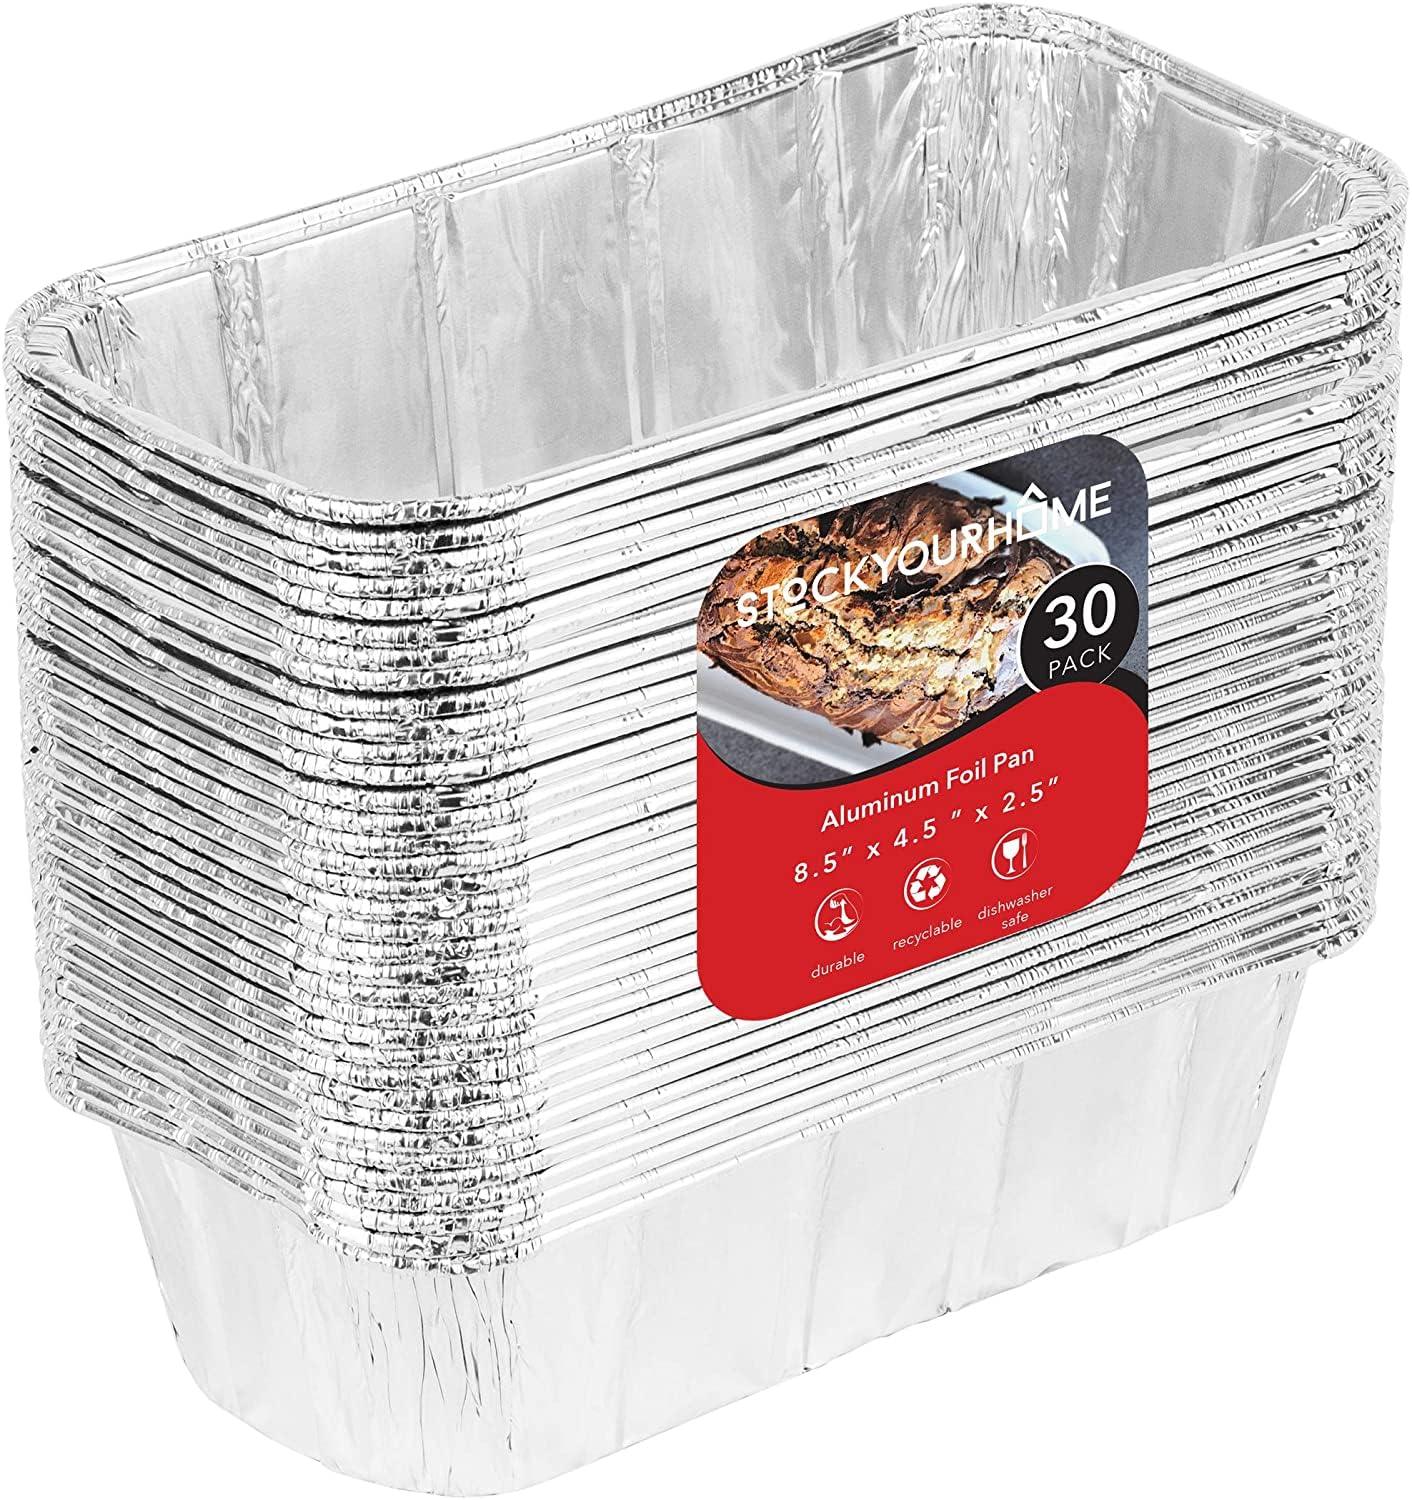 Stock Your Home 2 Lb Aluminum Foil Mini Loaf Pans (30 Pack) Disposable Small Loaf Pan – 2 Pound Baking Tin Liners, Perfect to Bake Cakes, Bread Loaves, and Meat - 8.5 x 4.5 x 2.5 - CookCave